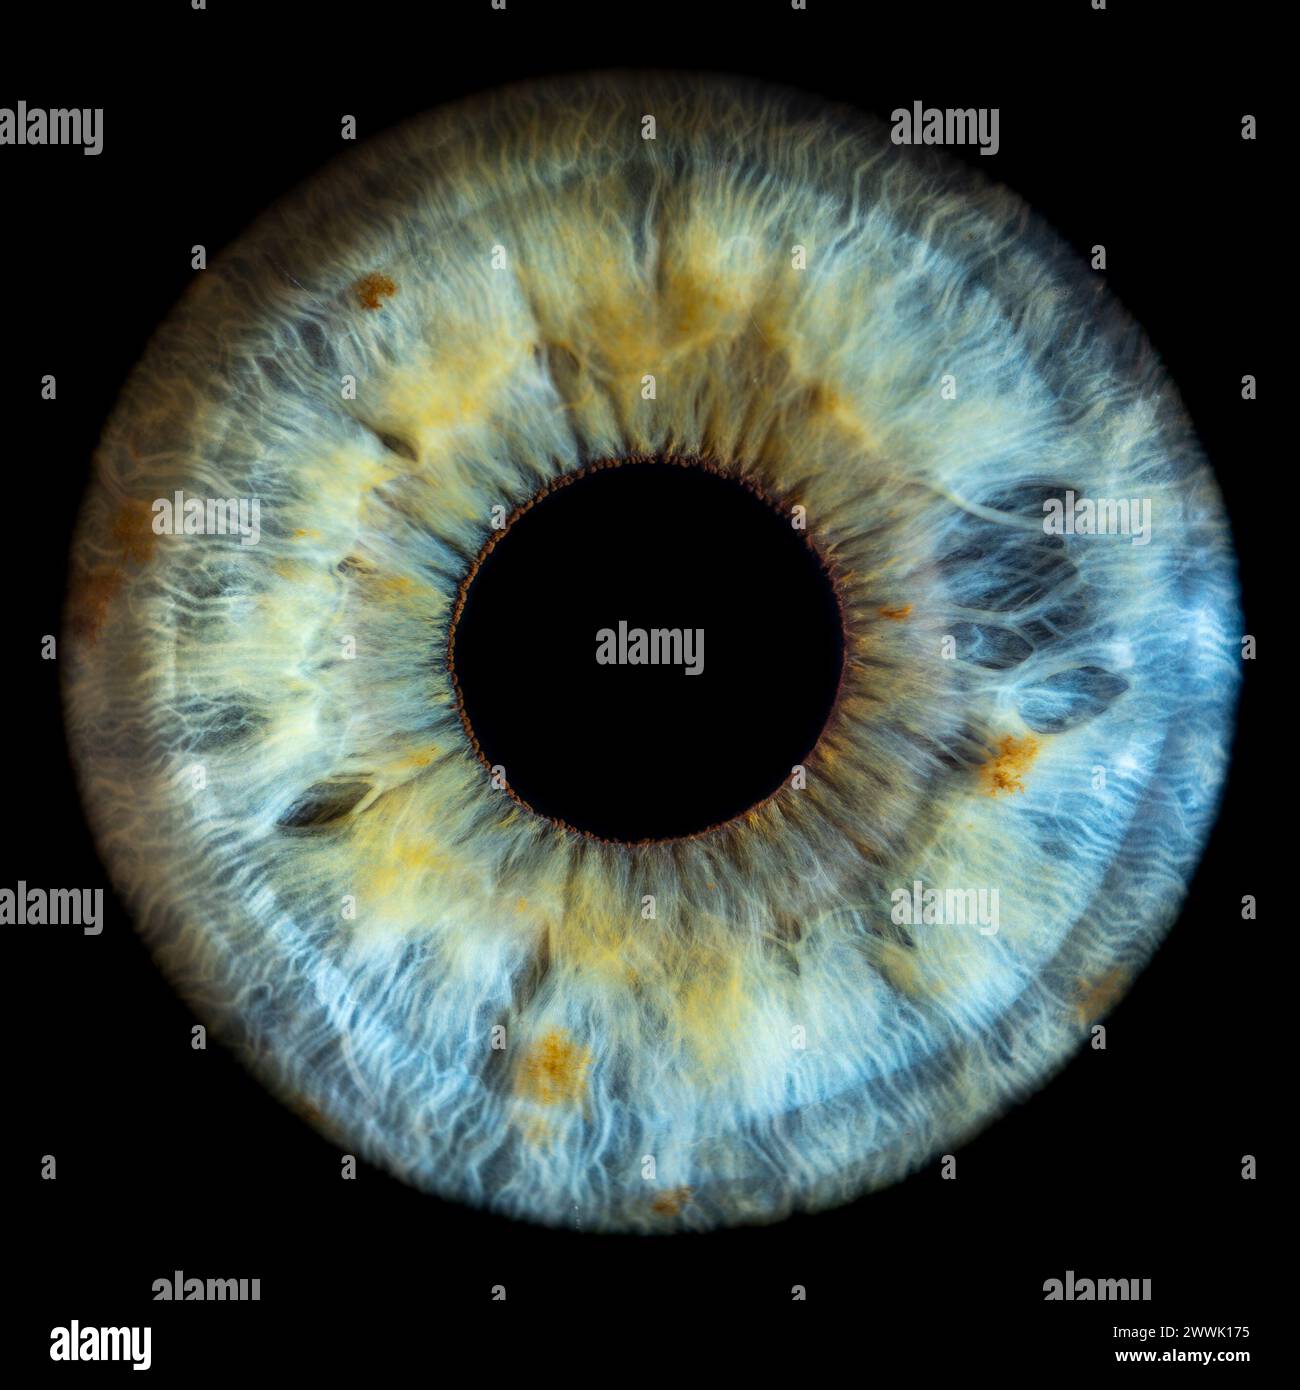 Description: Macro photo of human eye on black background. Close-up of female blue-green colored eye with yellow spots. Structural Anatomy. Iris Detai Stock Photo